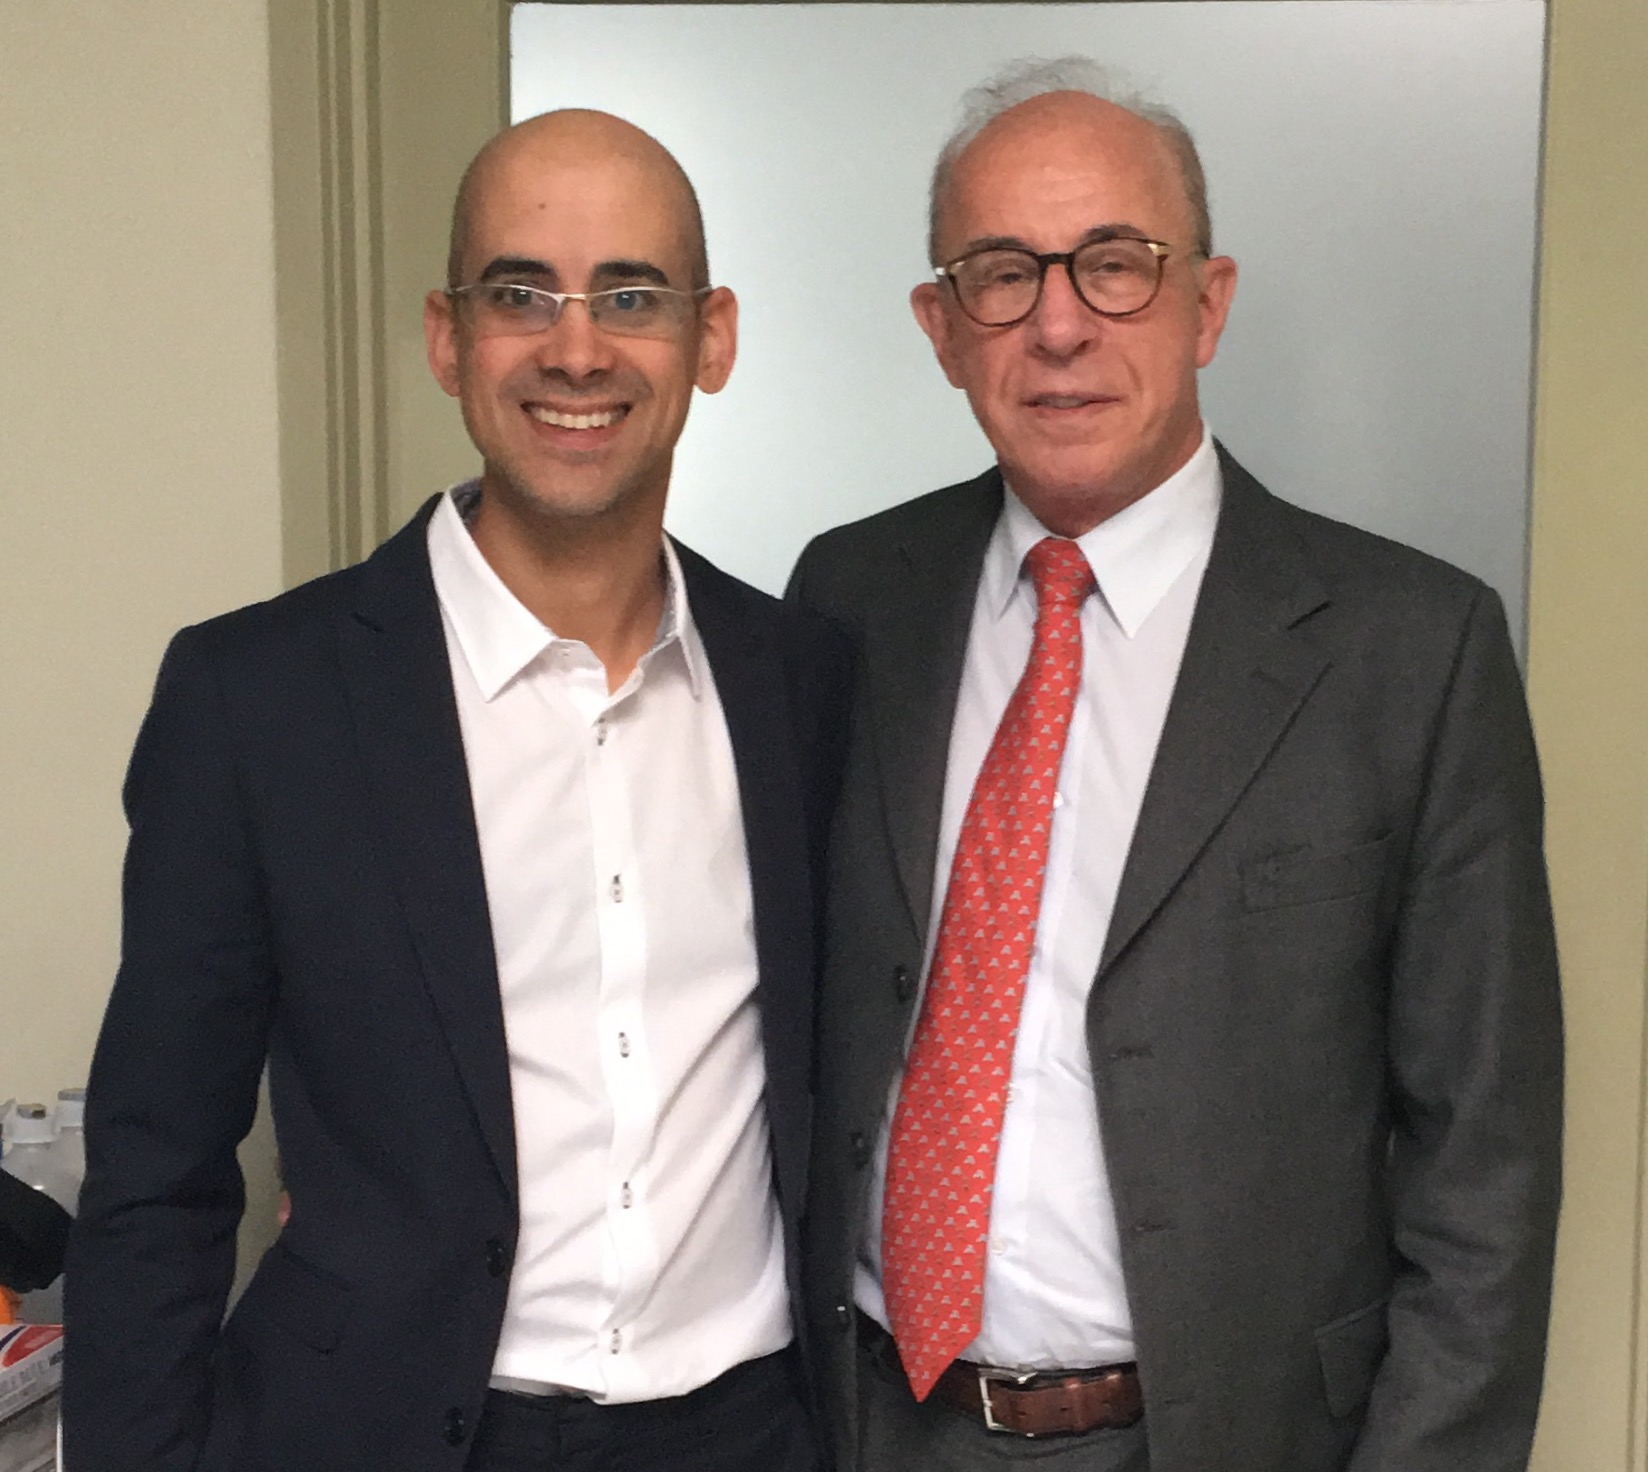 Drs Anzarut and Mendelson